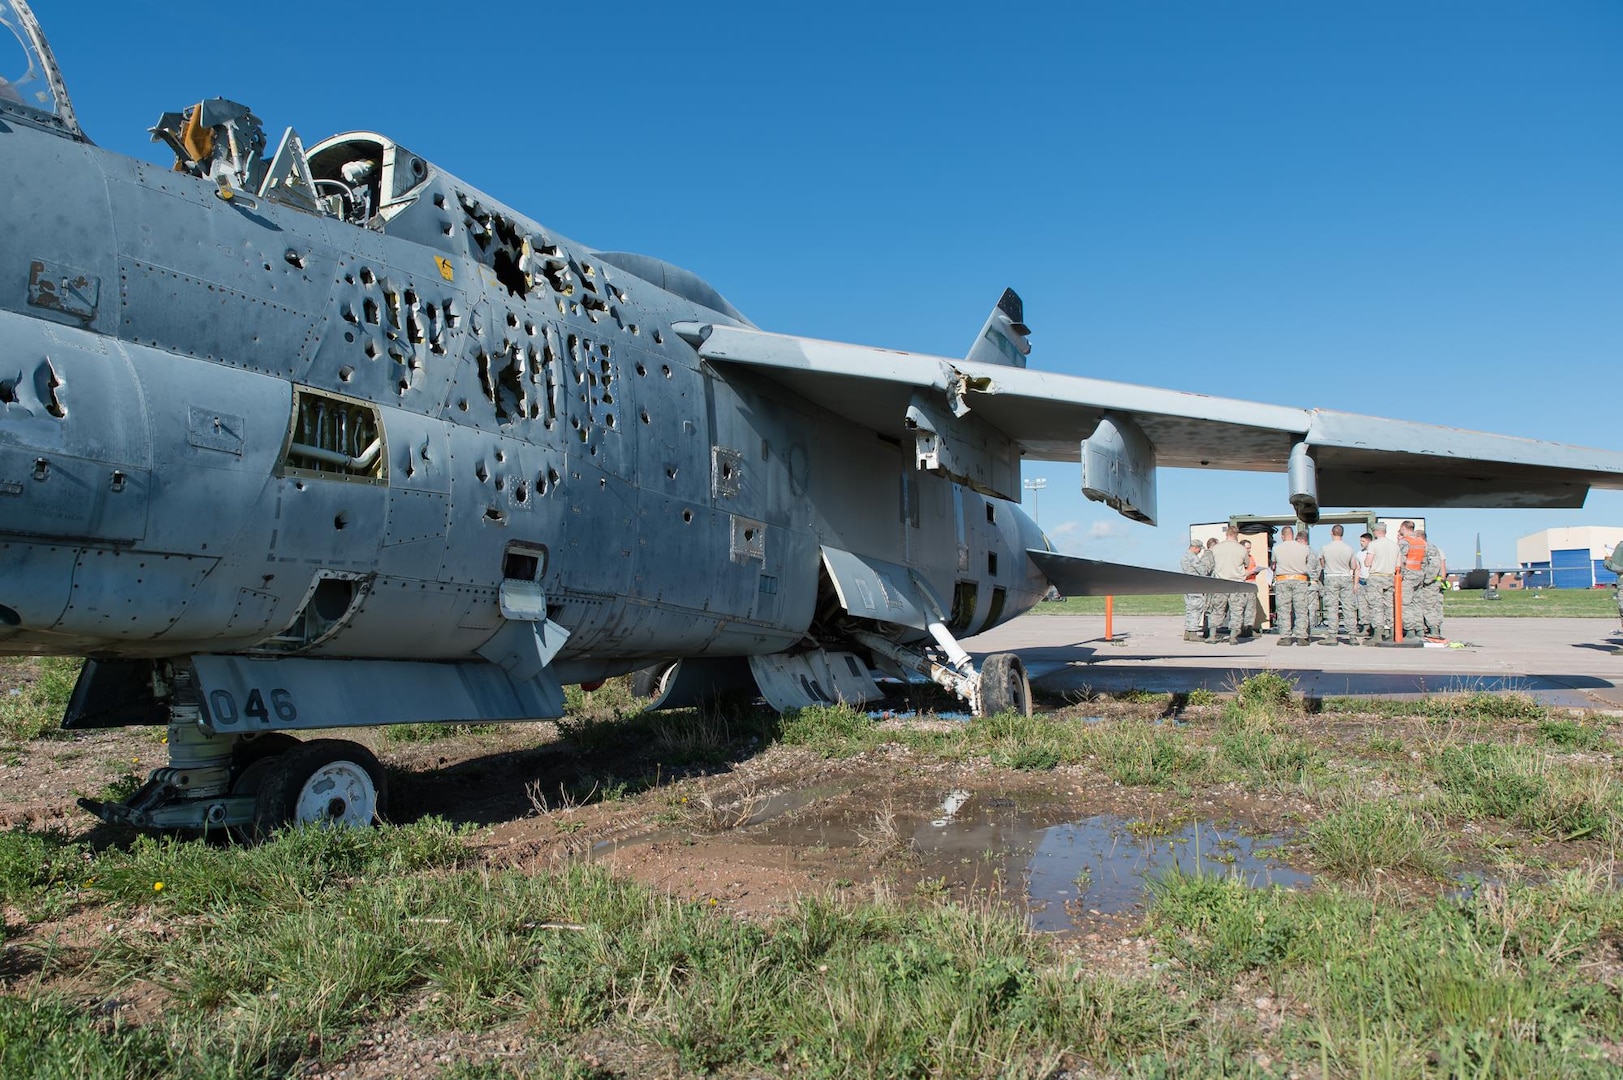 U.S. Air Force Airmen with the 153rd Maintenance Group's Crash Damage or Disabled Aircraft Recovery team conduct a safety briefing prior to jacking an A-7 Corsair II aircraft, May 11, 2017 in Cheyenne, Wyoming. Maintainers from all aircraft specialties practiced moving a fighter aircraft from the mud into a parking spot as part of an annual CDDAR requirement. (U.S. Air National Guard photo by Senior Master Sgt. Charles Delano/released)